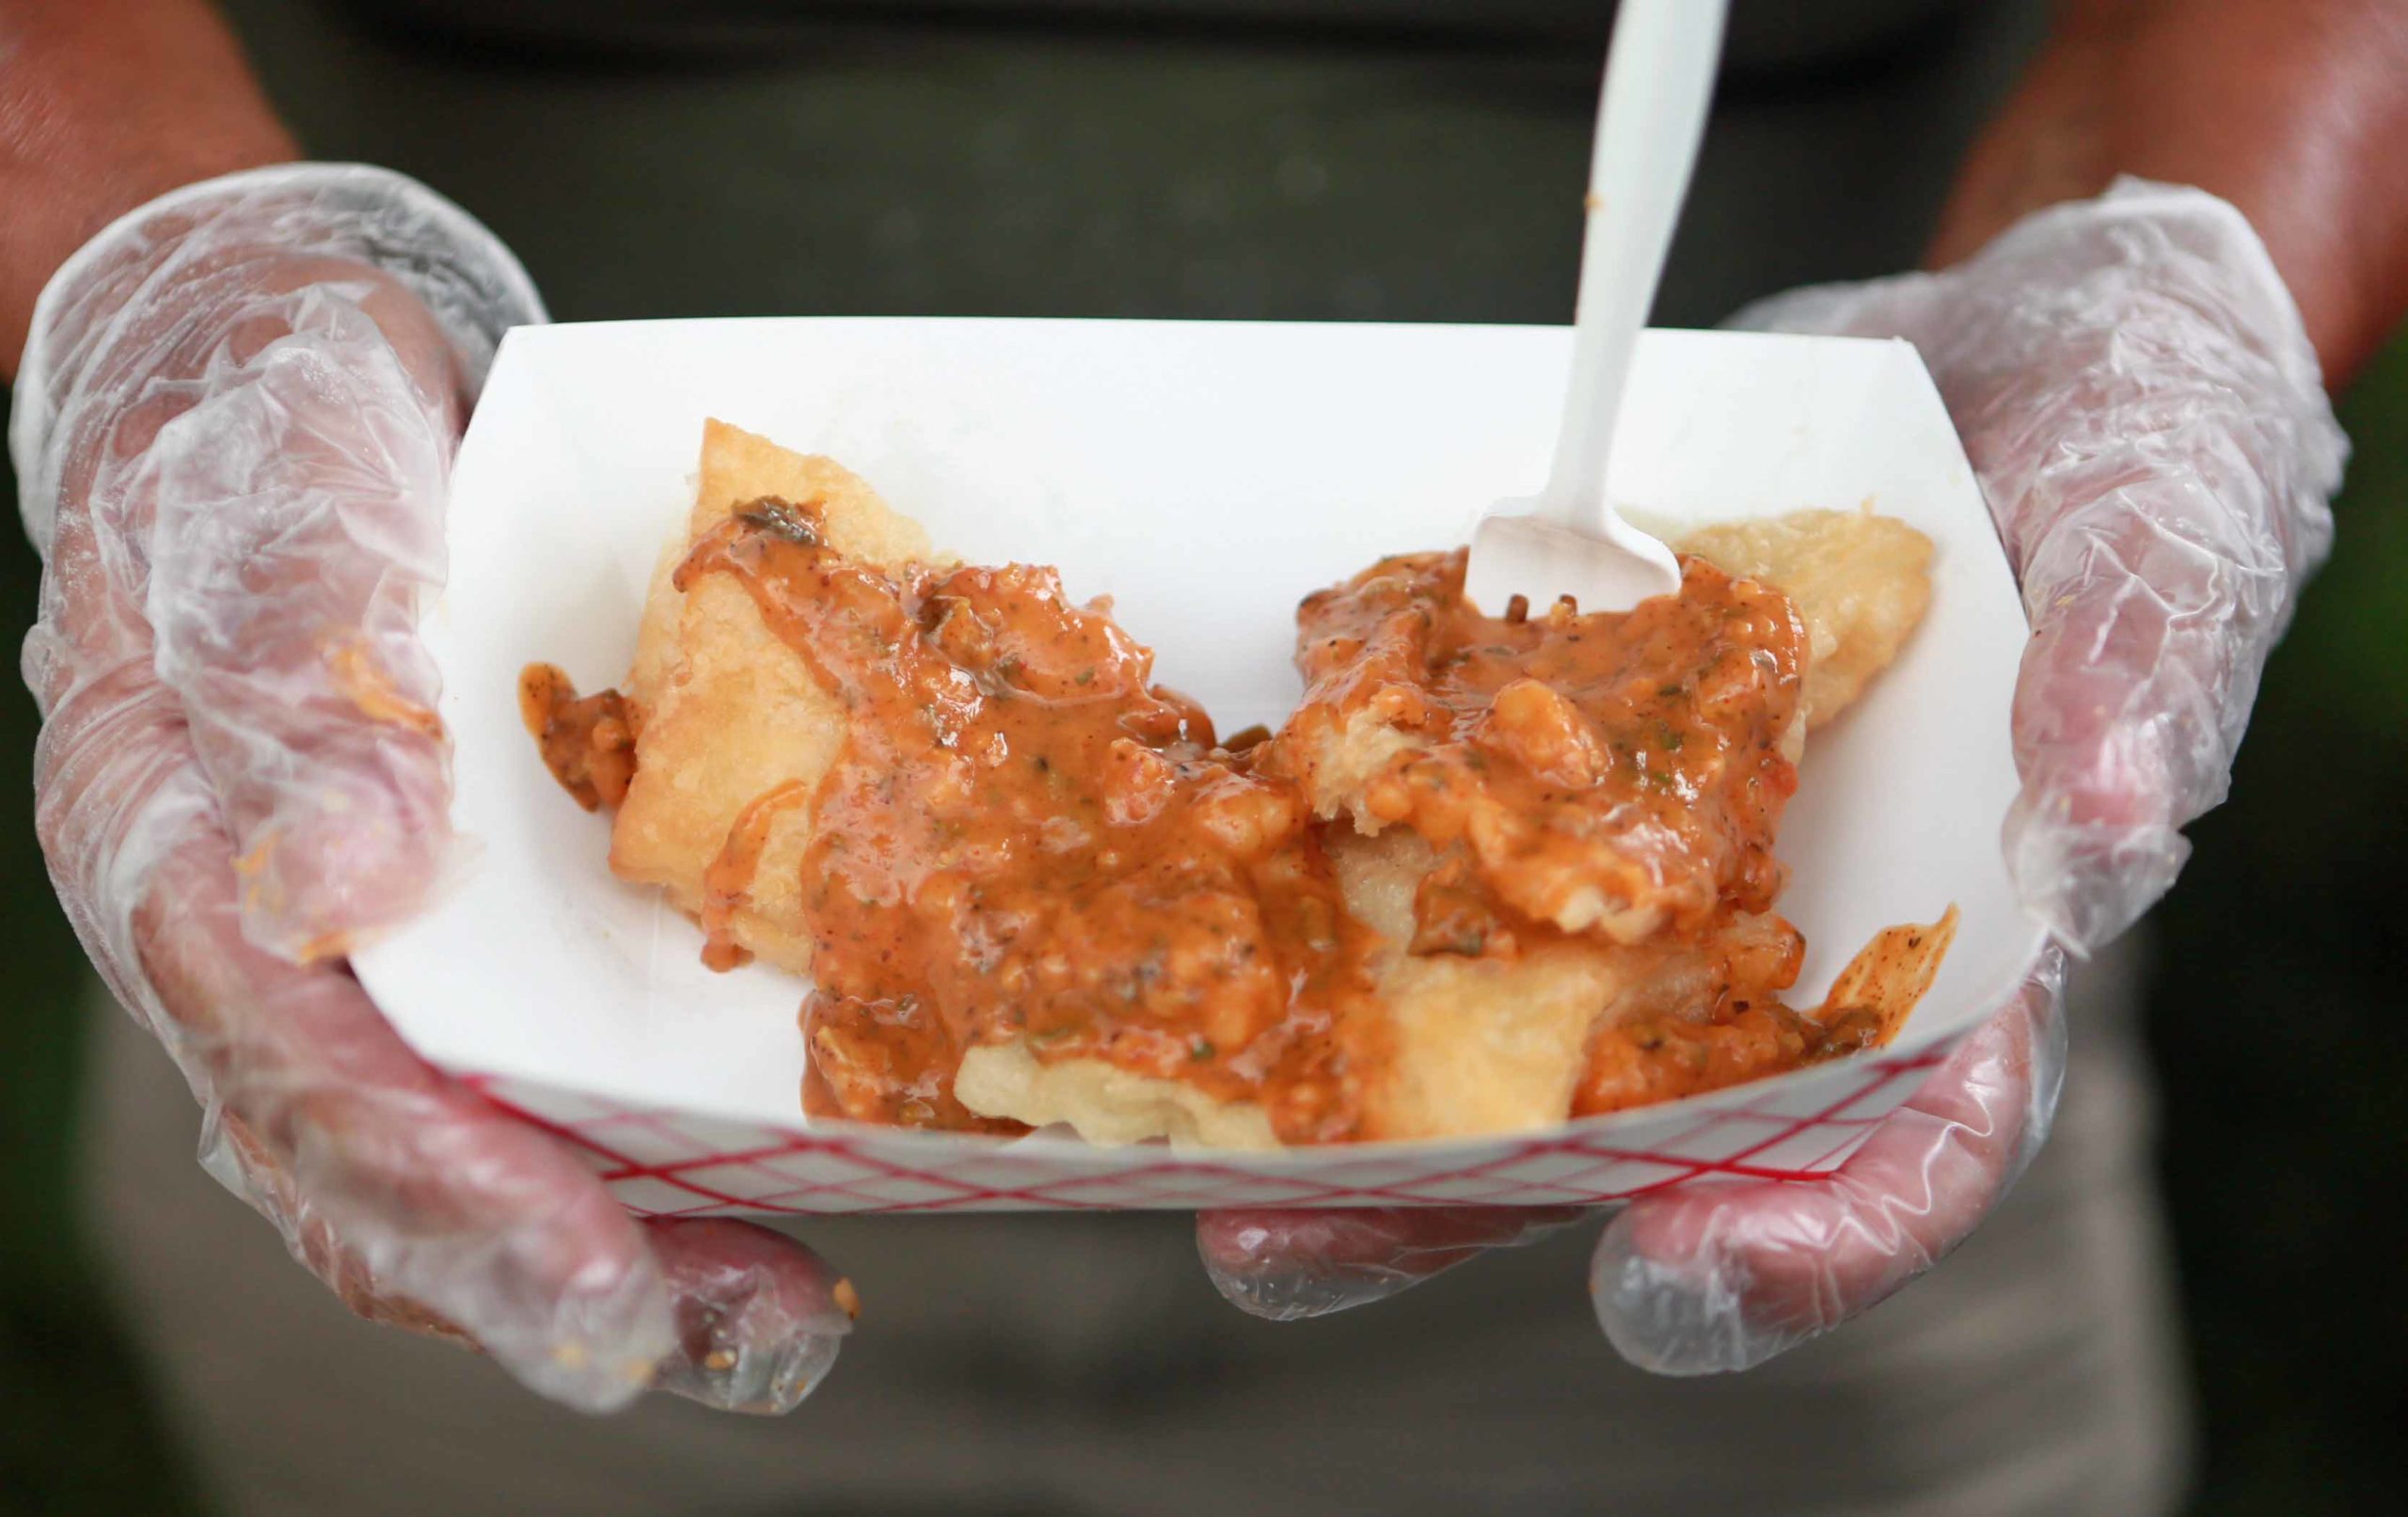 A Shrimp Creole Beignet courtesy of Valerie's Creole Sneaux Catering is on display during the Beignet Festival at the City Park Festival Grounds in New Orleans on Saturday, October 6, 2018.  (Photo by Peter G. Forest)  Instagram:  @forestphoto_llc